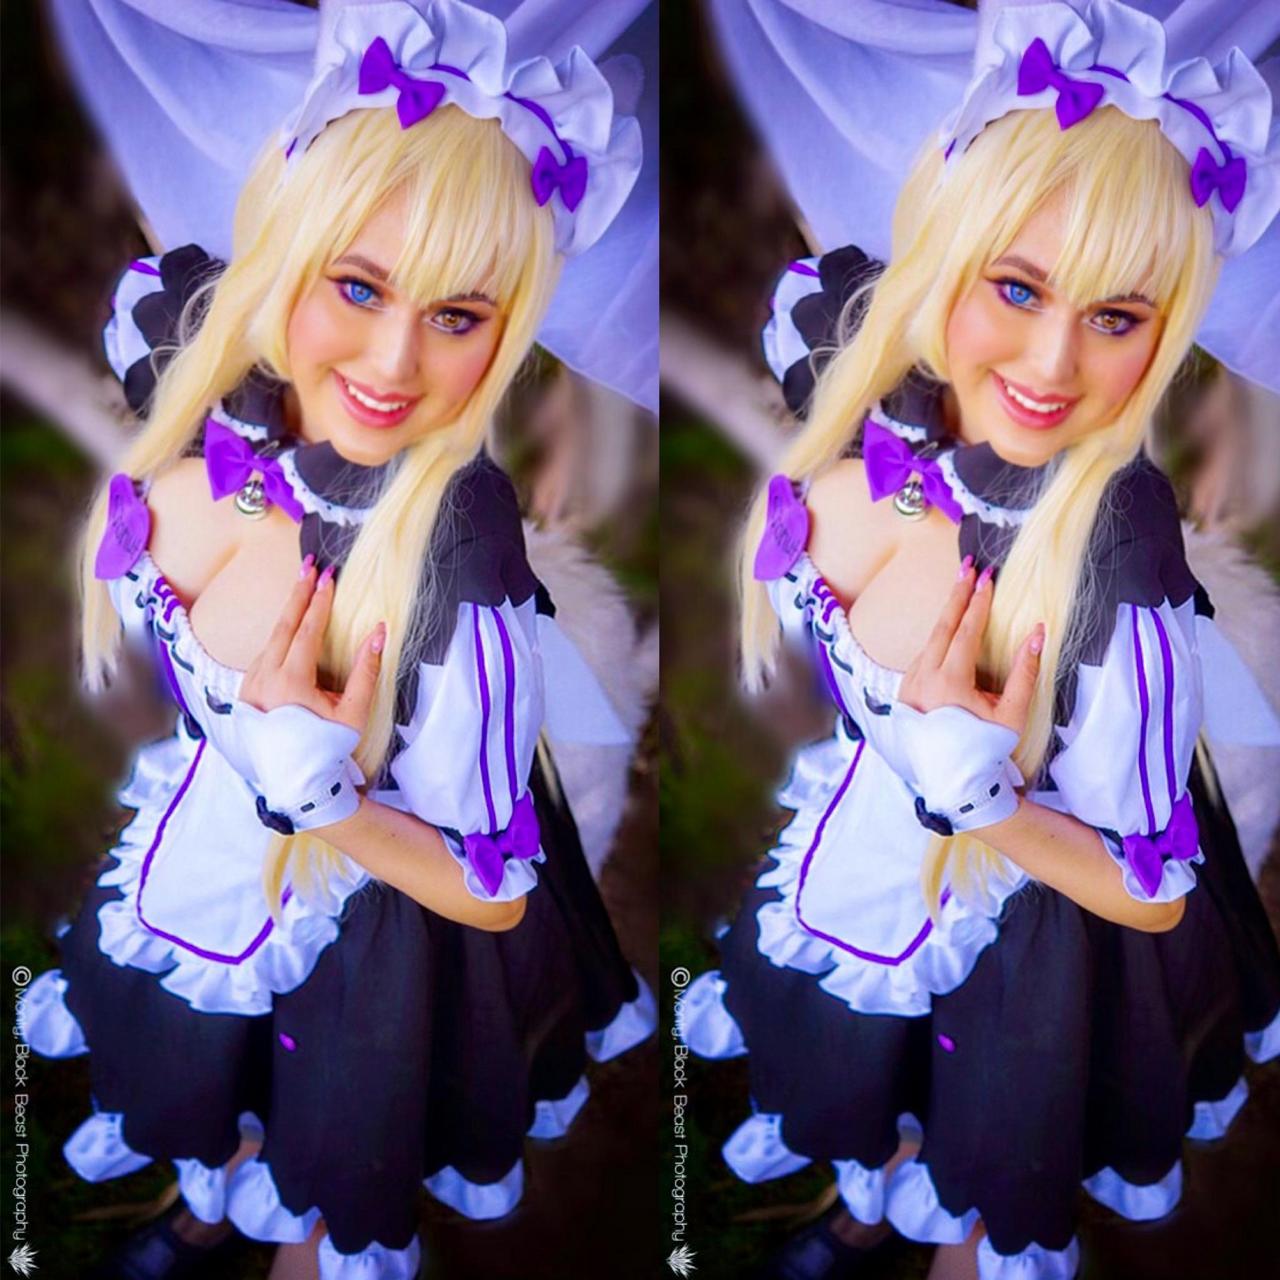 Coconut From Nekopara By Larisusa Picture Taken By Black Beast Photograph